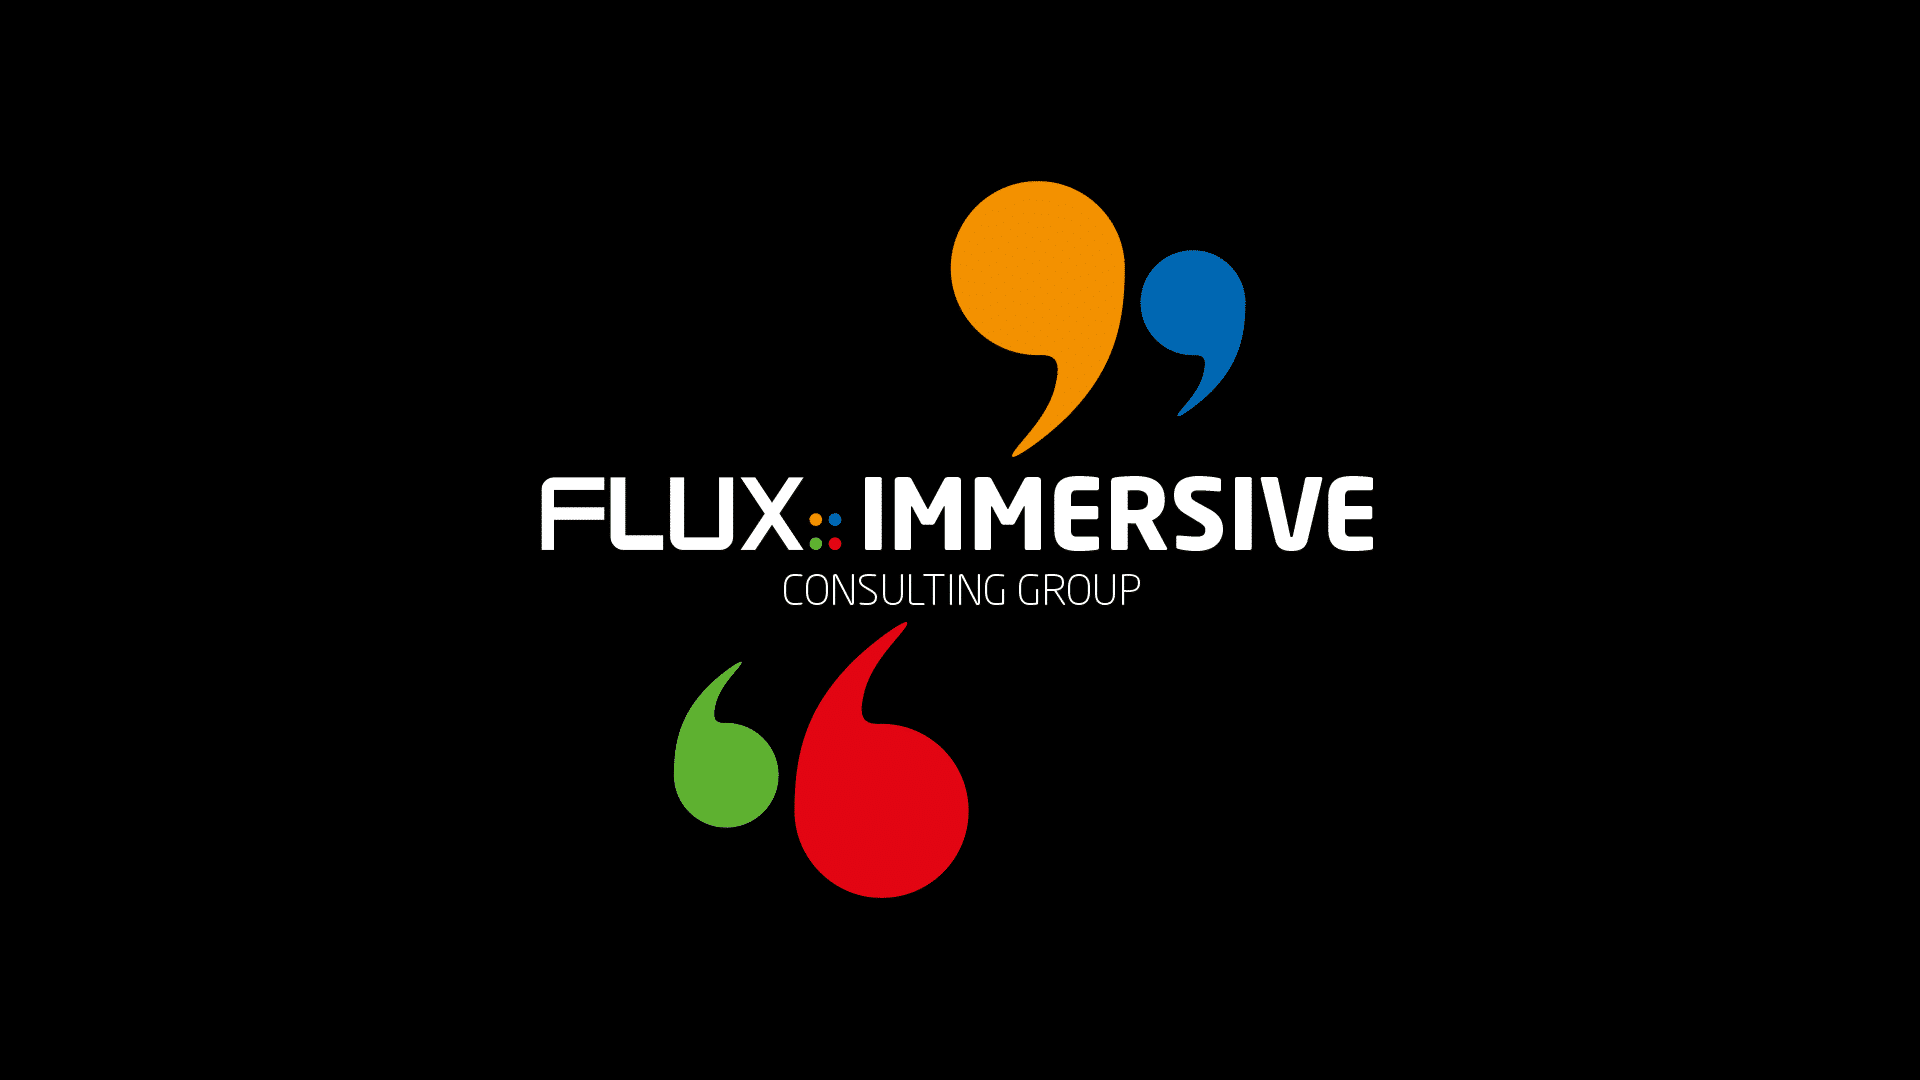 LS Media Joins the FLUX:: Immersive Consulting Group